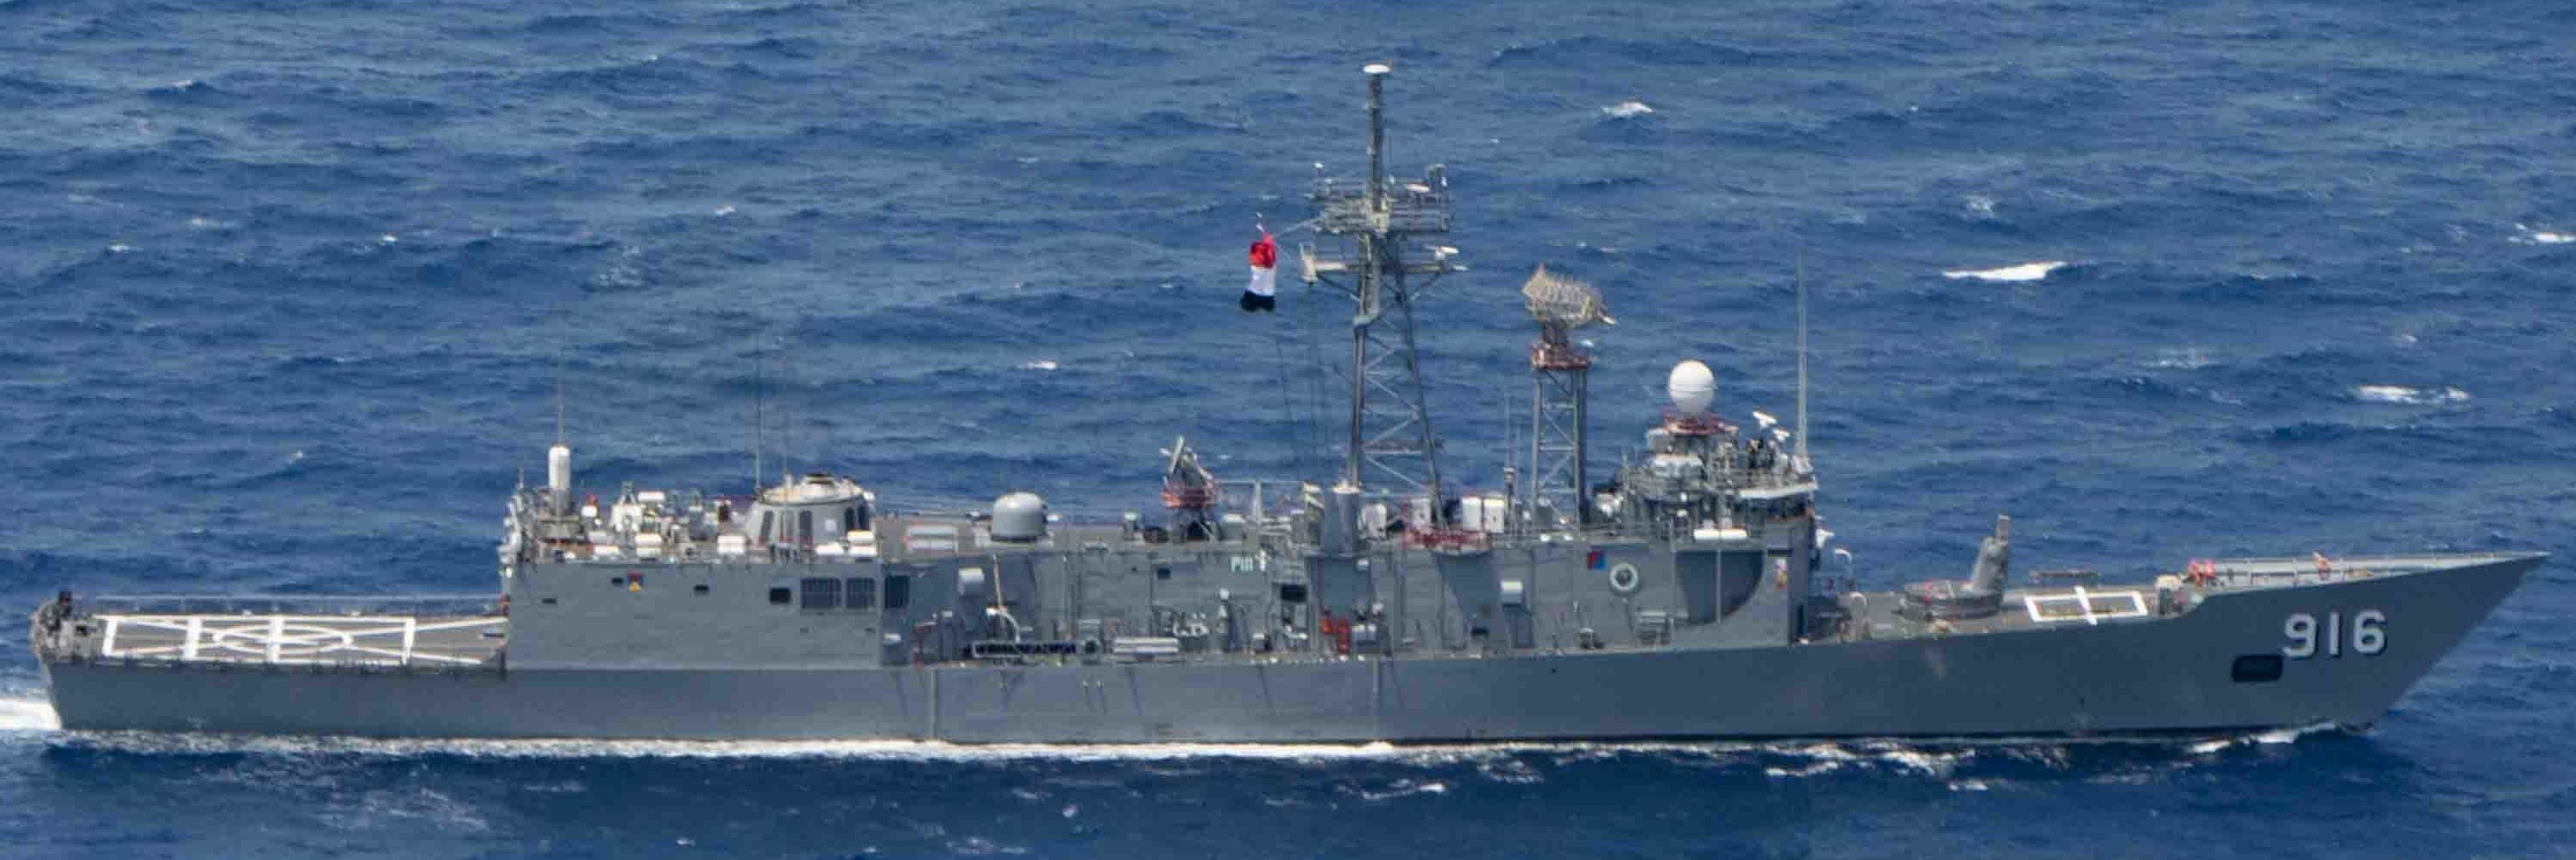 f-916 ens taba perry class frigate egyptian naval force navy 02